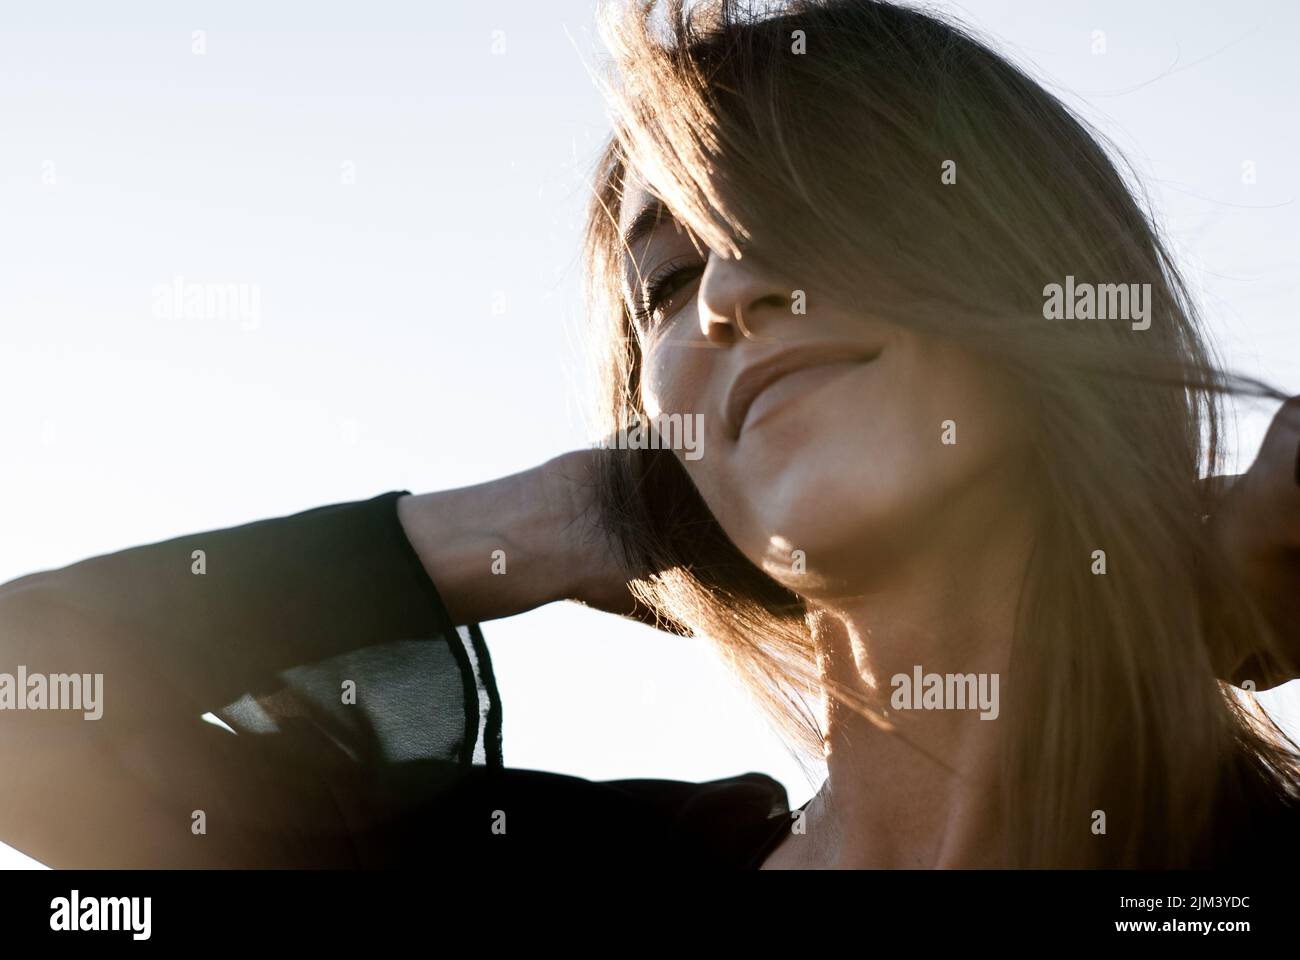 A Romanian woman smiling in sunny weather Stock Photo